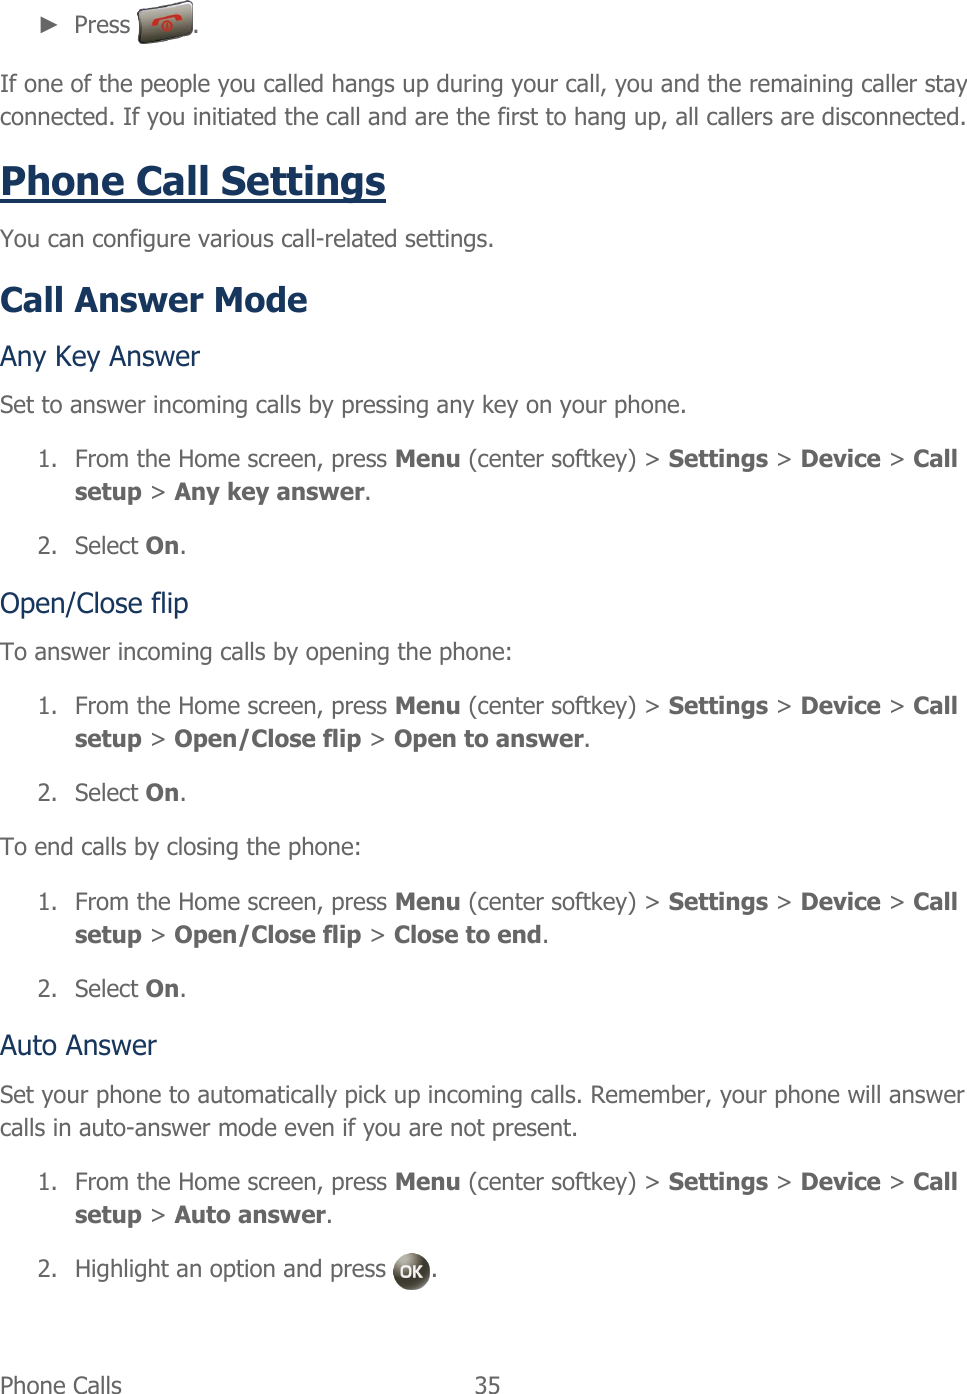  Phone Calls   35   ► Press  . If one of the people you called hangs up during your call, you and the remaining caller stay connected. If you initiated the call and are the first to hang up, all callers are disconnected. Phone Call Settings You can configure various call-related settings. Call Answer Mode Any Key Answer Set to answer incoming calls by pressing any key on your phone. 1. From the Home screen, press Menu (center softkey) &gt; Settings &gt; Device &gt; Call setup &gt; Any key answer. 2. Select On. Open/Close flip To answer incoming calls by opening the phone: 1. From the Home screen, press Menu (center softkey) &gt; Settings &gt; Device &gt; Call setup &gt; Open/Close flip &gt; Open to answer. 2. Select On. To end calls by closing the phone: 1. From the Home screen, press Menu (center softkey) &gt; Settings &gt; Device &gt; Call setup &gt; Open/Close flip &gt; Close to end. 2. Select On. Auto Answer Set your phone to automatically pick up incoming calls. Remember, your phone will answer calls in auto-answer mode even if you are not present. 1. From the Home screen, press Menu (center softkey) &gt; Settings &gt; Device &gt; Call setup &gt; Auto answer. 2. Highlight an option and press  . 